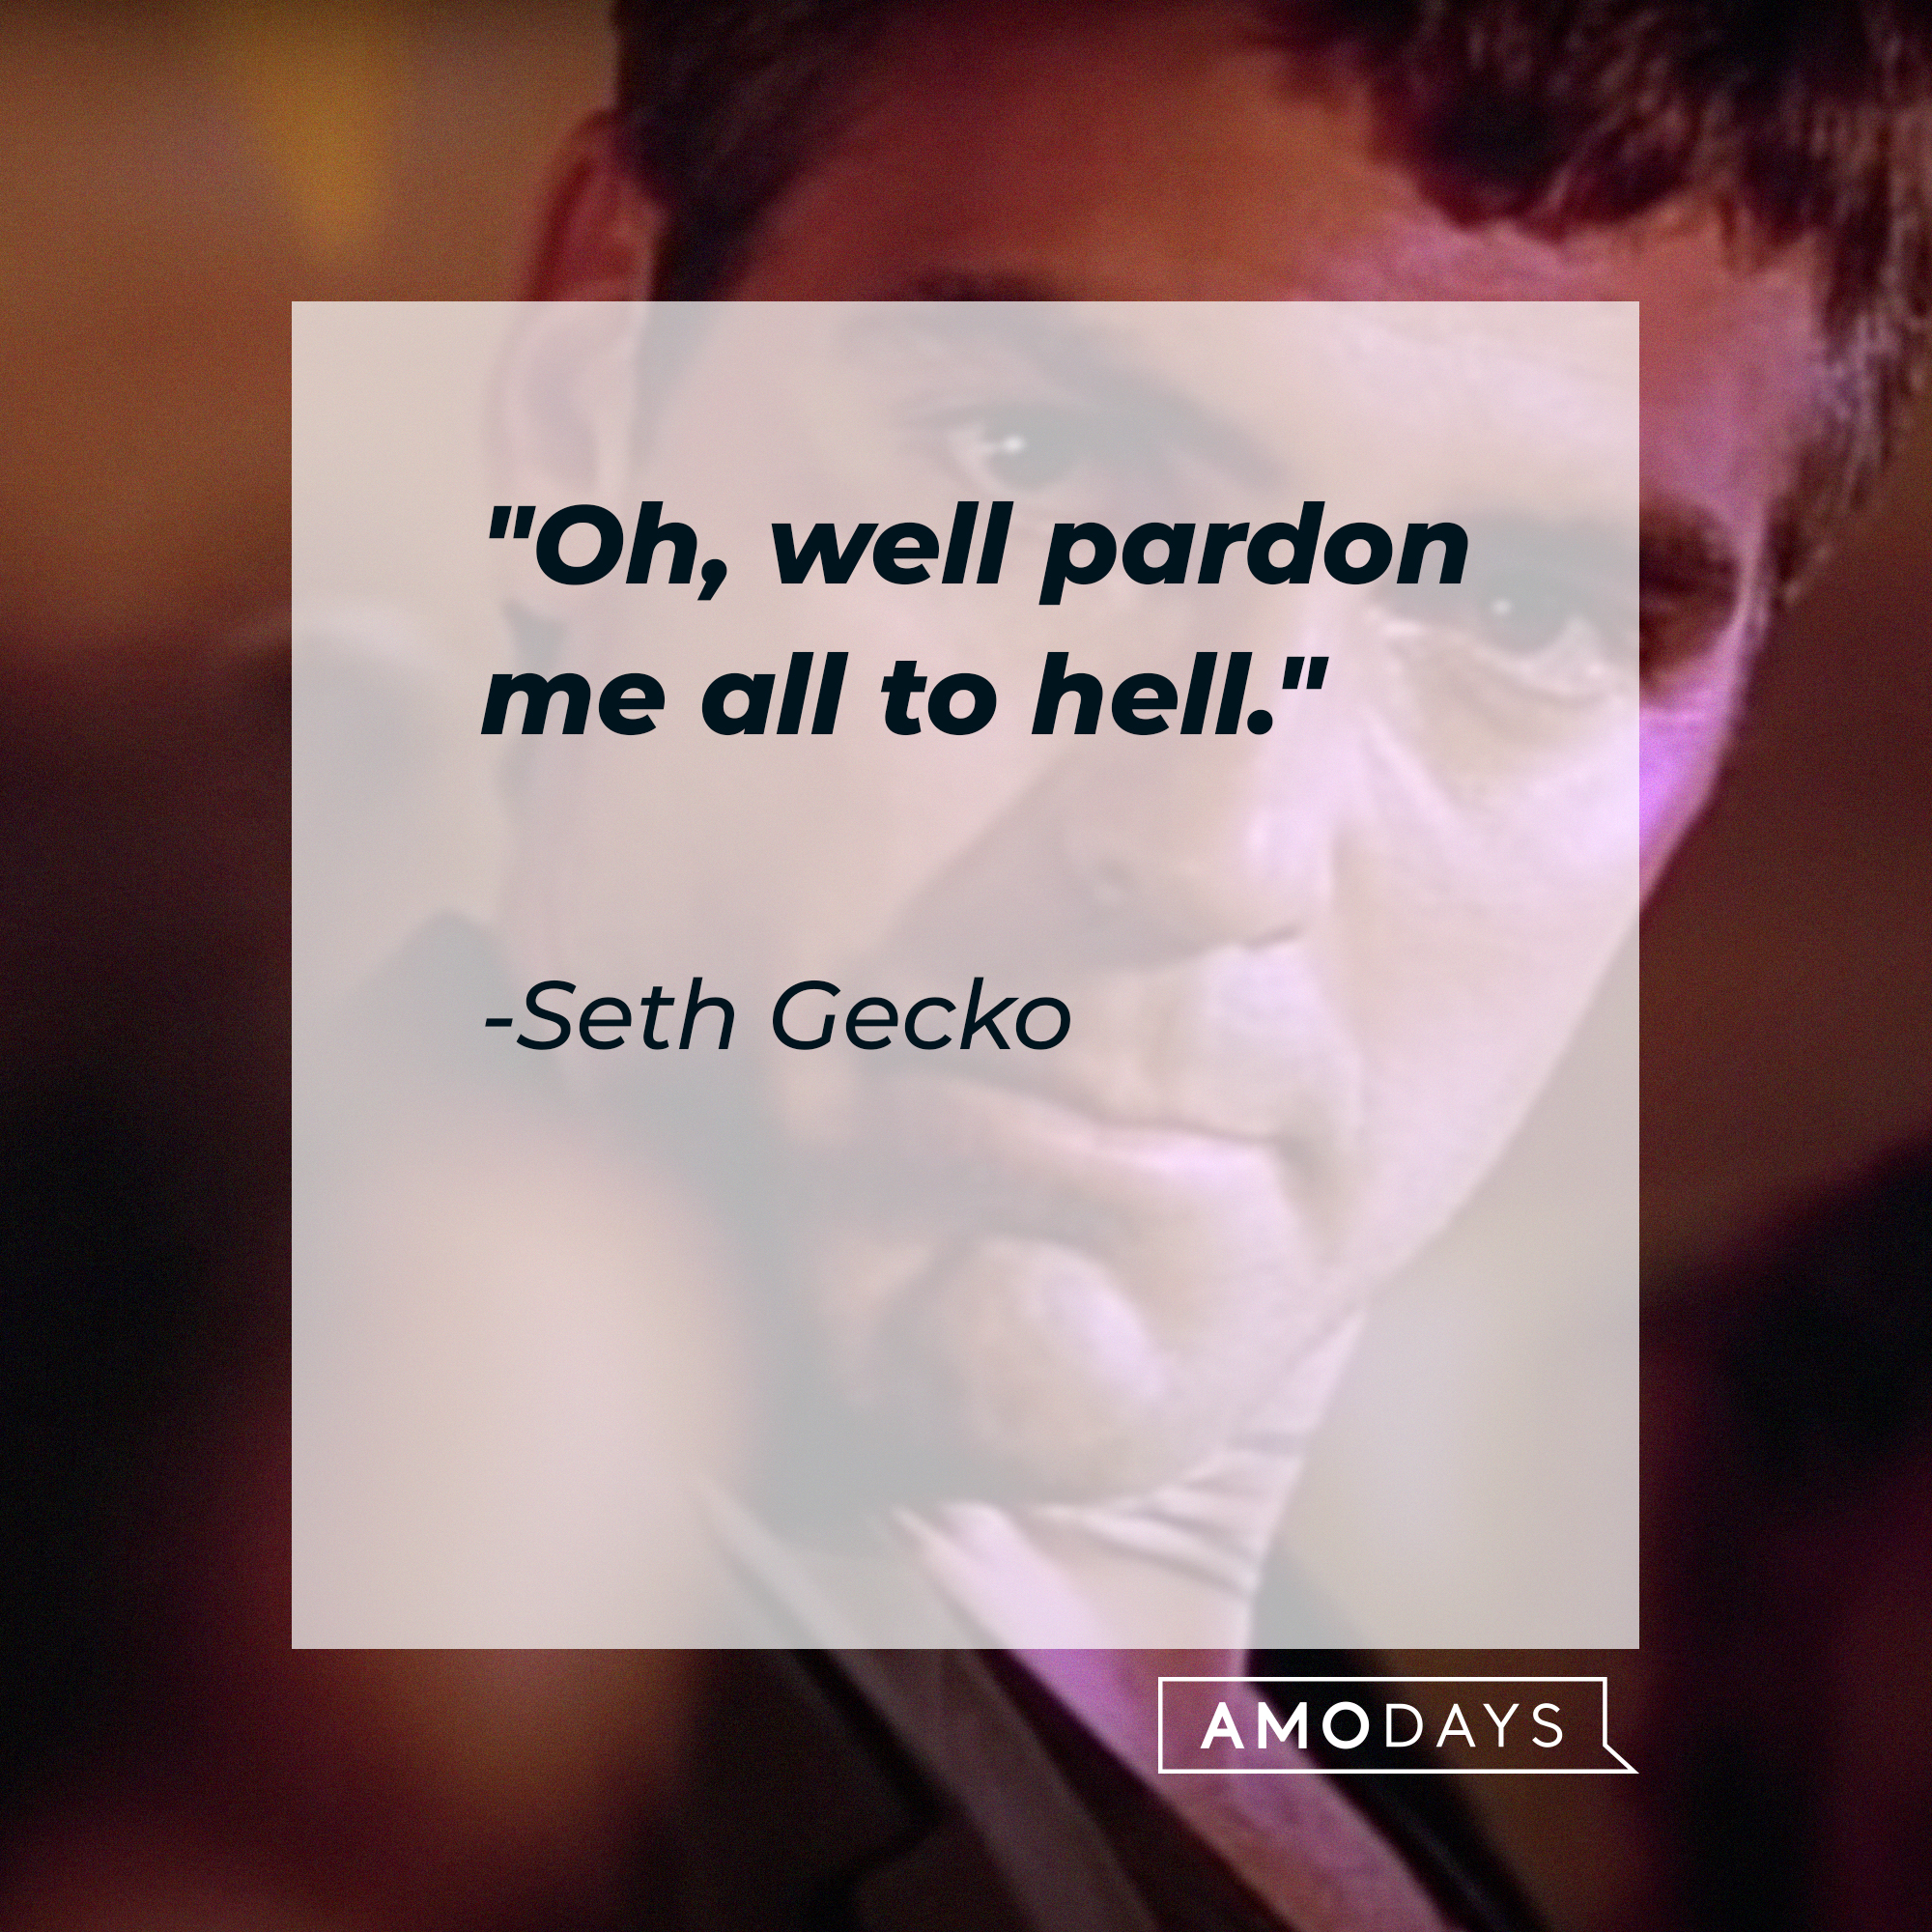 Seth Gecko's quote: "Oh, well pardon me all to hell." | Source: youtube.com/miramax